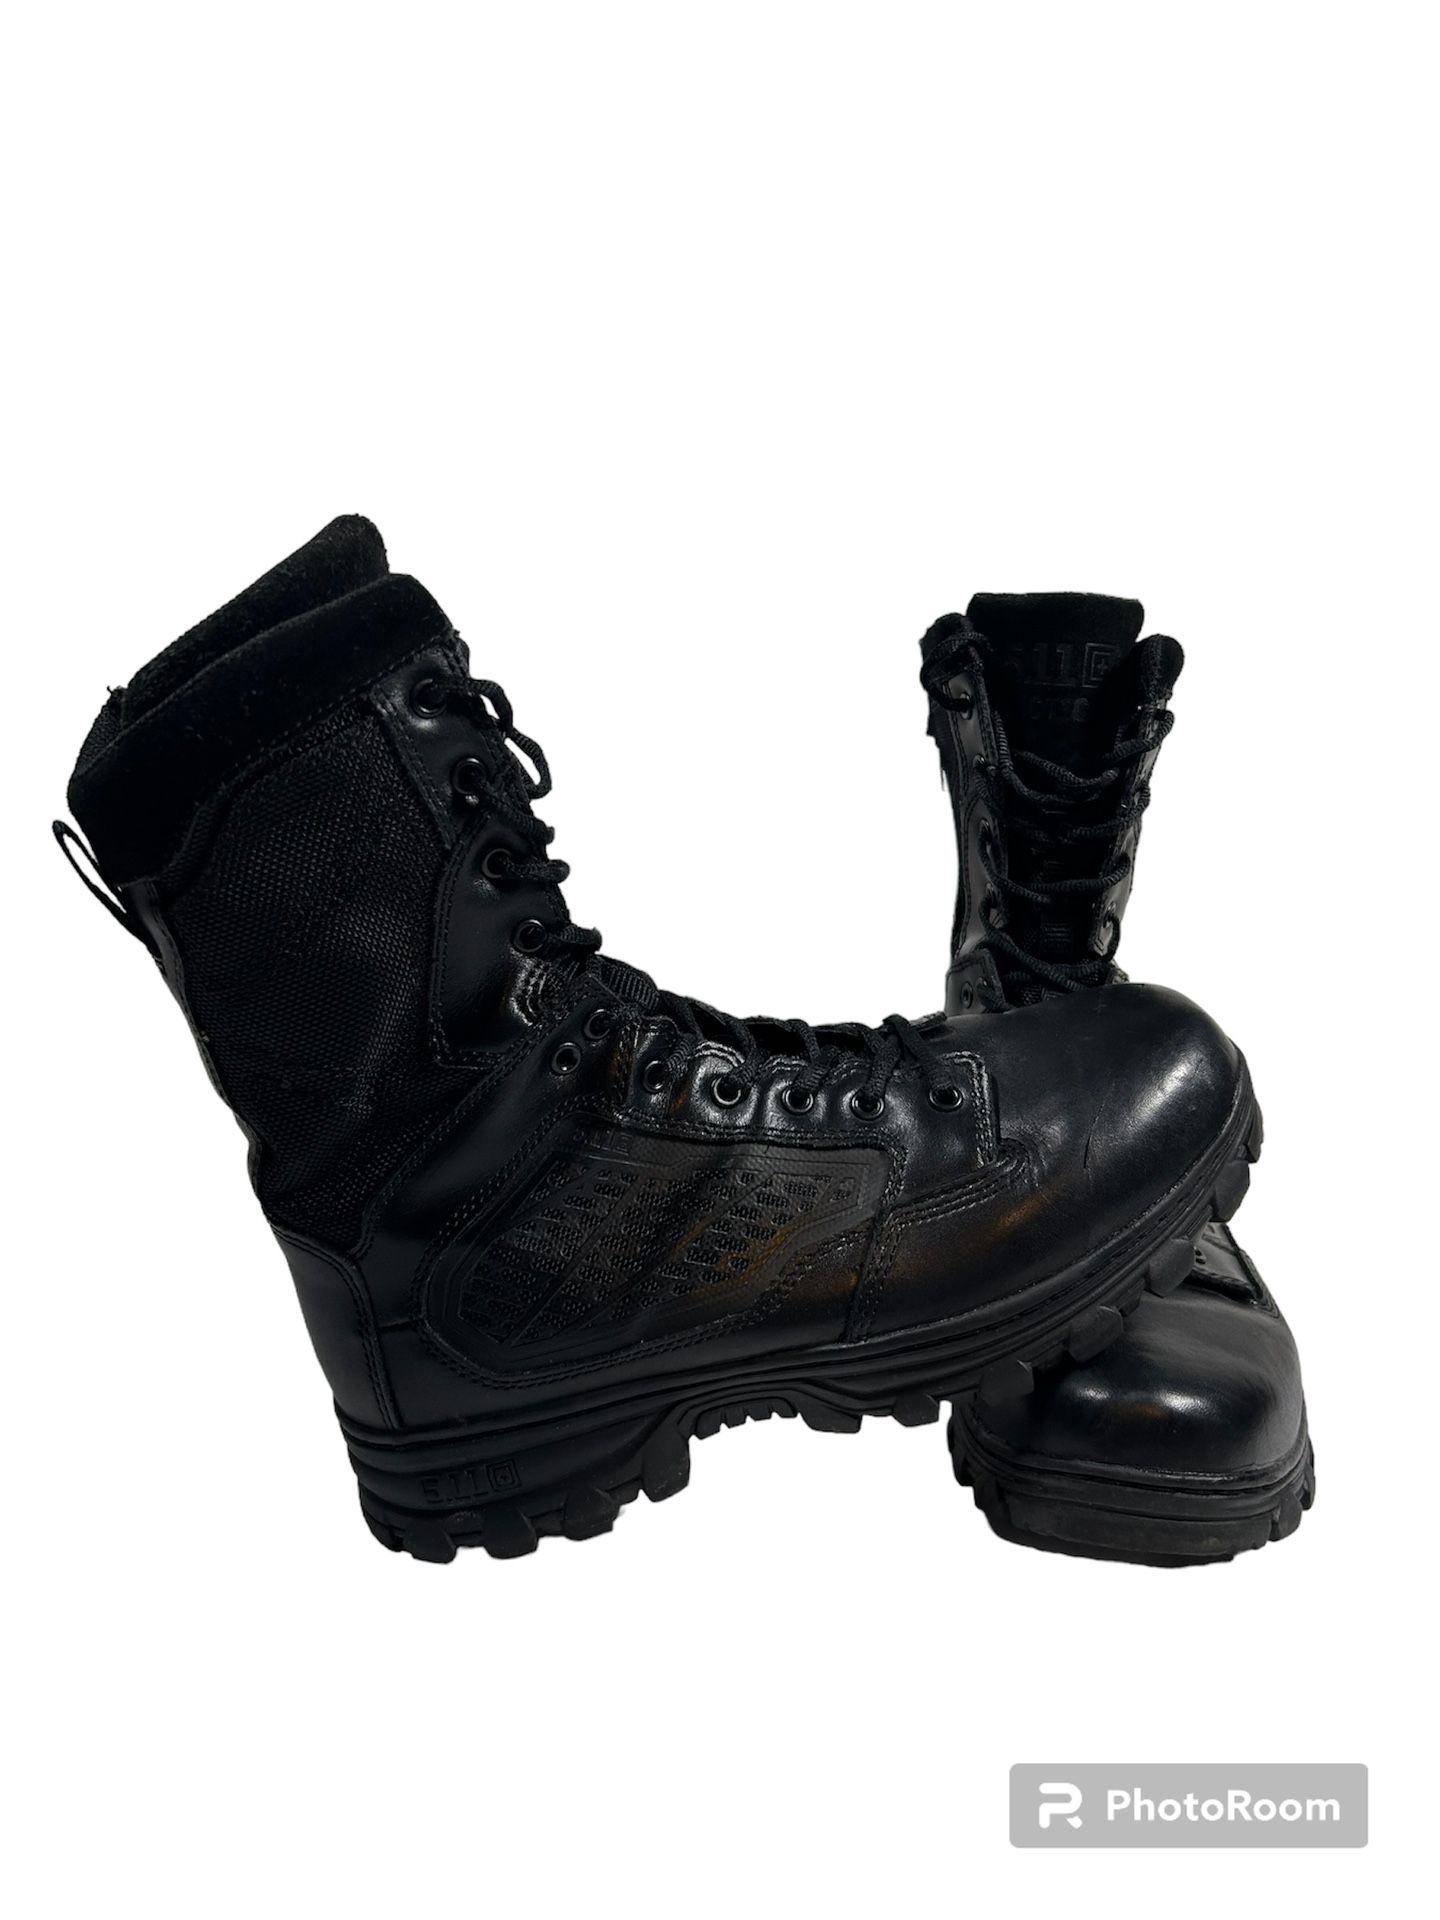  511 Men's Black Tactical Boots Size 9.5 Lace up with side zipper.